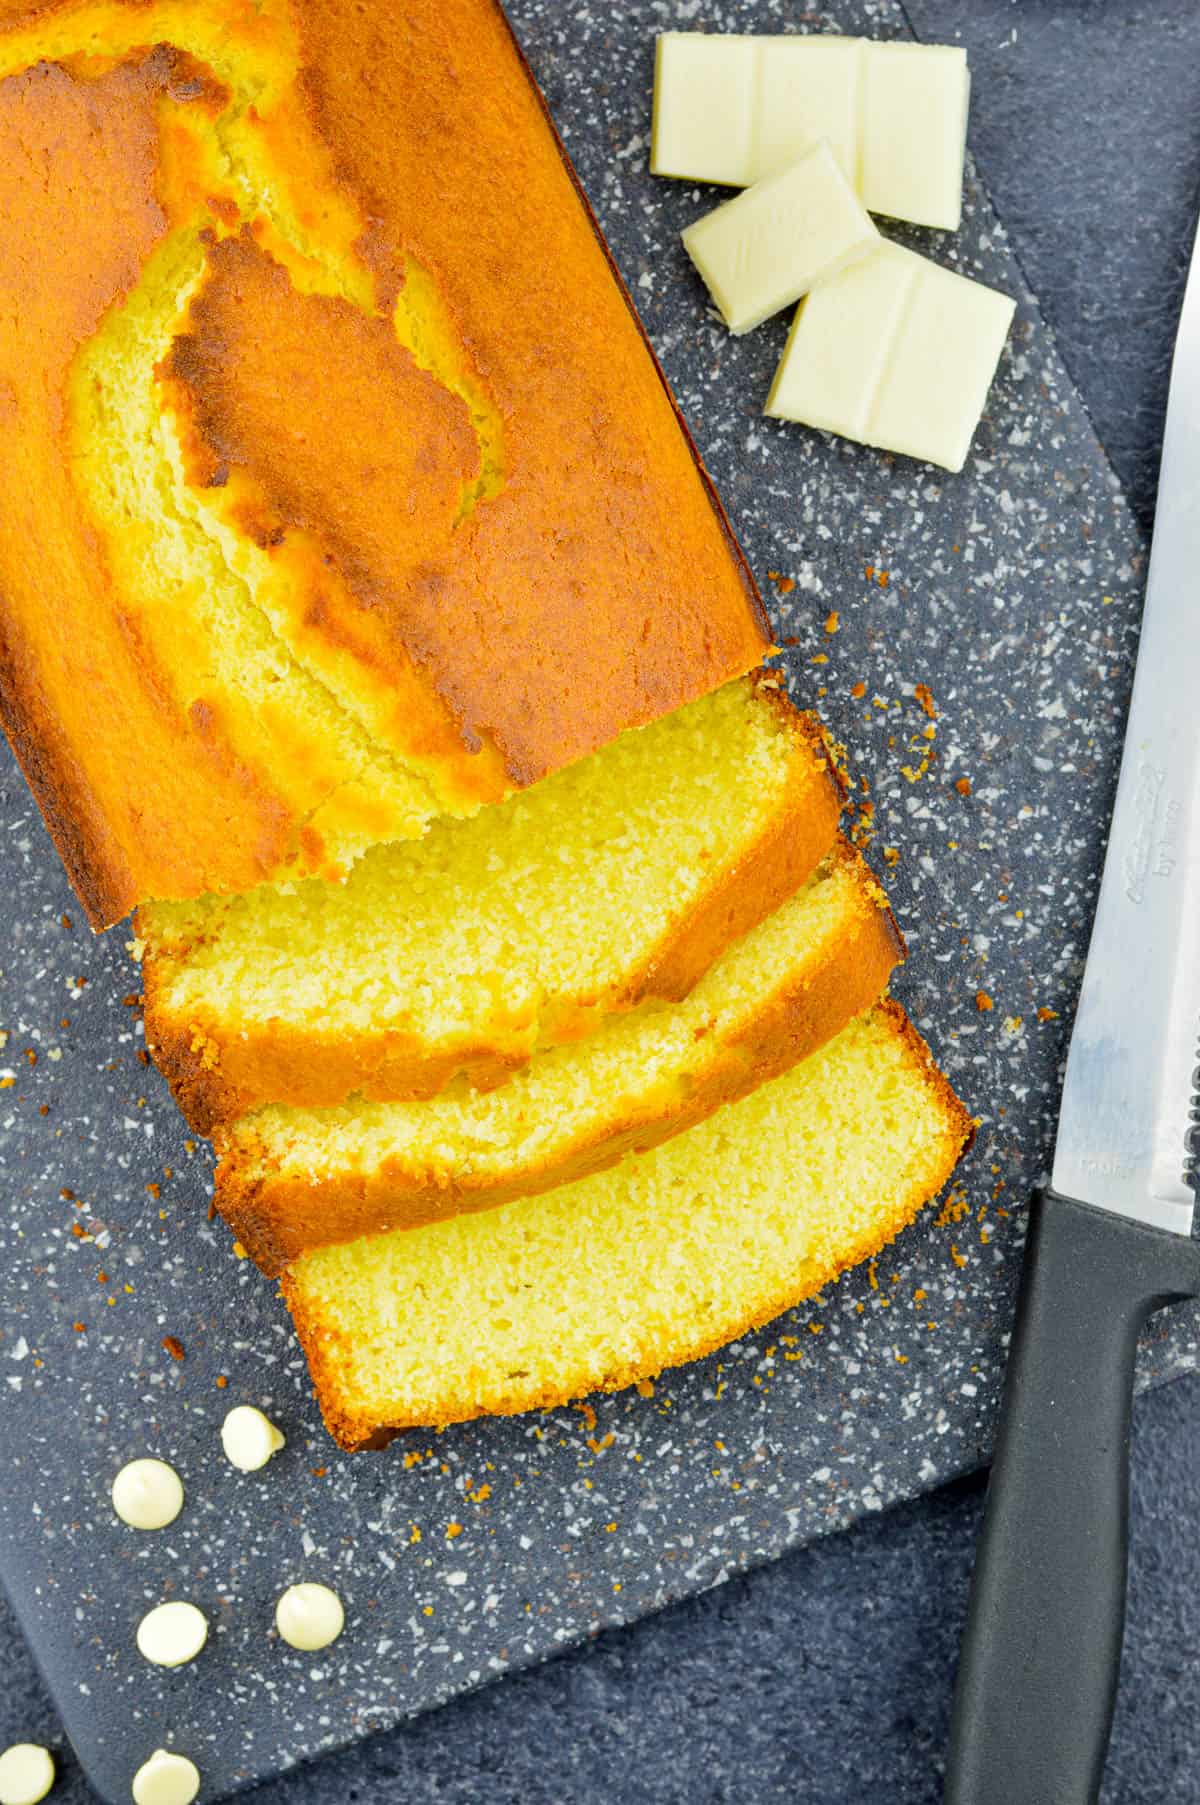 top shot of a loaf of white chocolate pound cake, with a few slices cut from the loaf, and a few pieces of white chocolate bar & chocolate chips on the sides